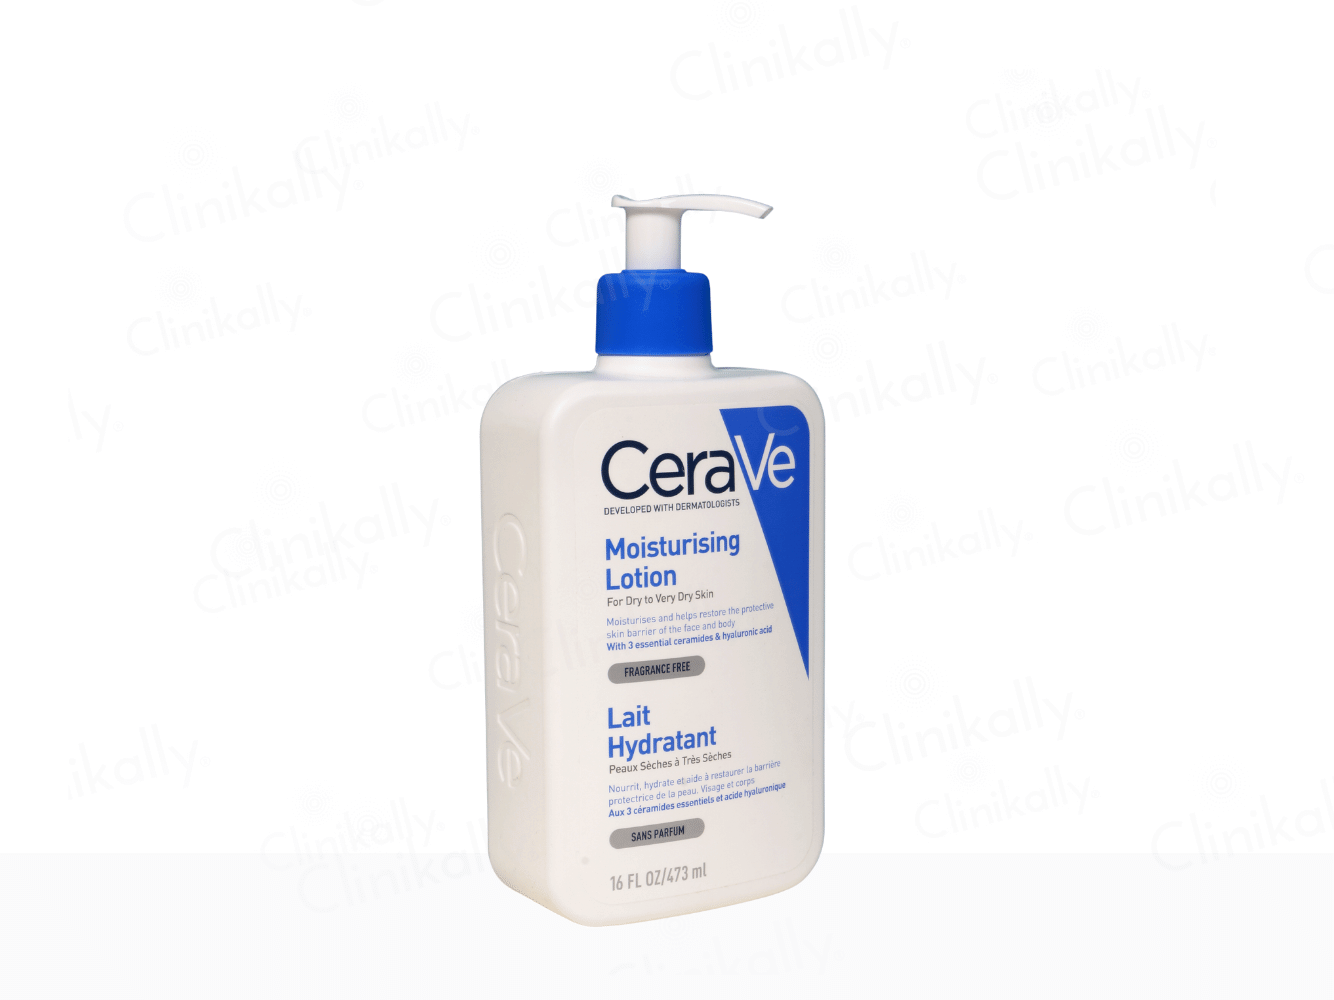 CeraVe Moisturising Lotion for Dry Skin to Very Dry Skin